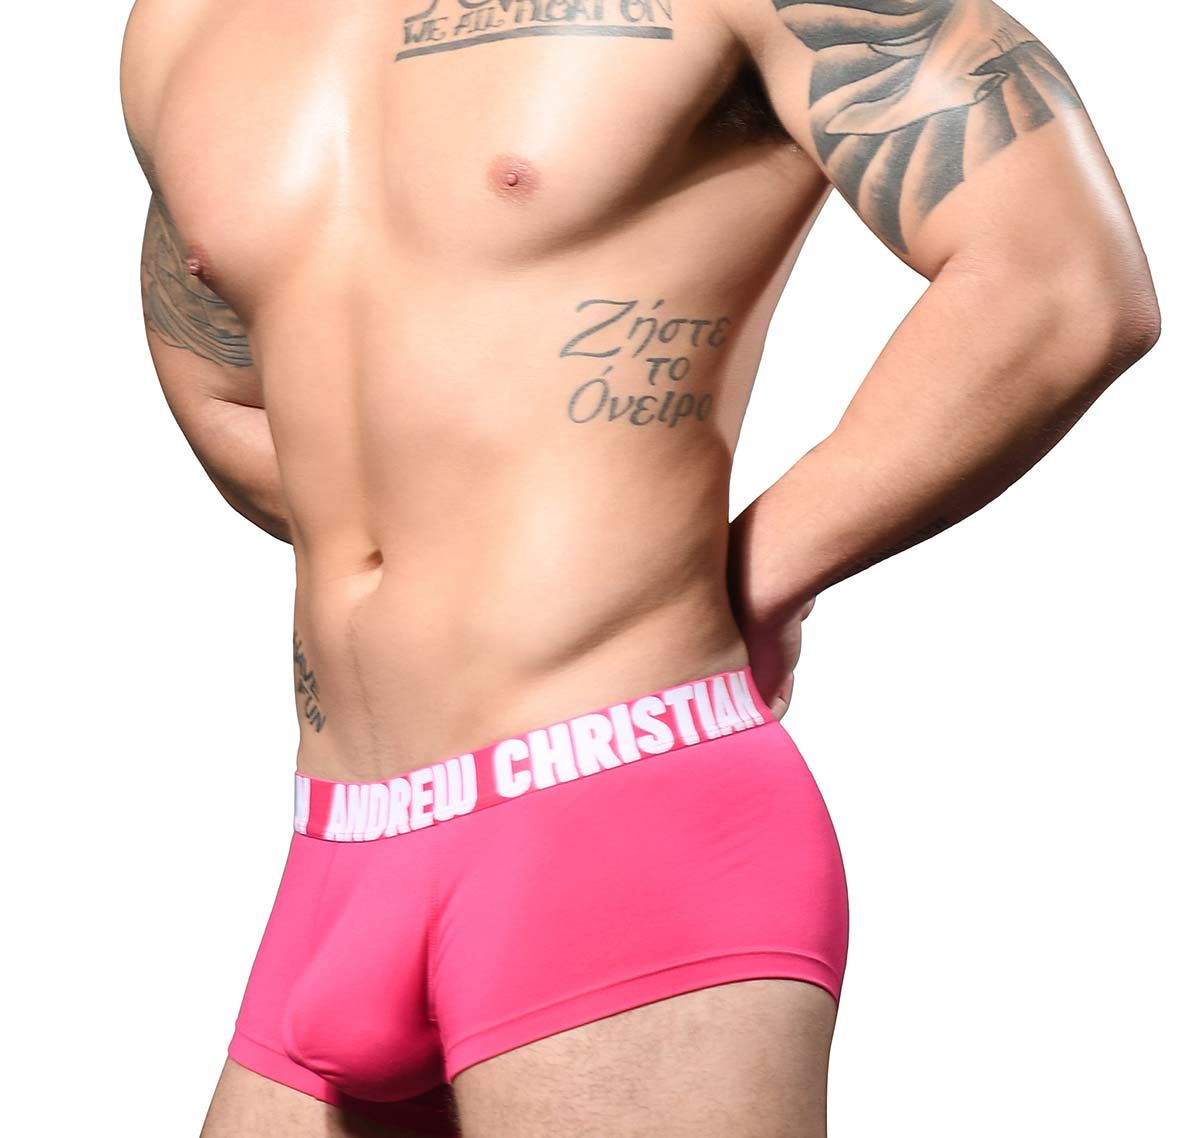 Andrew Christian Boxer SLOW FASHION ECO COLLECTIVE BOXER w/Almost Naked 93202, rose